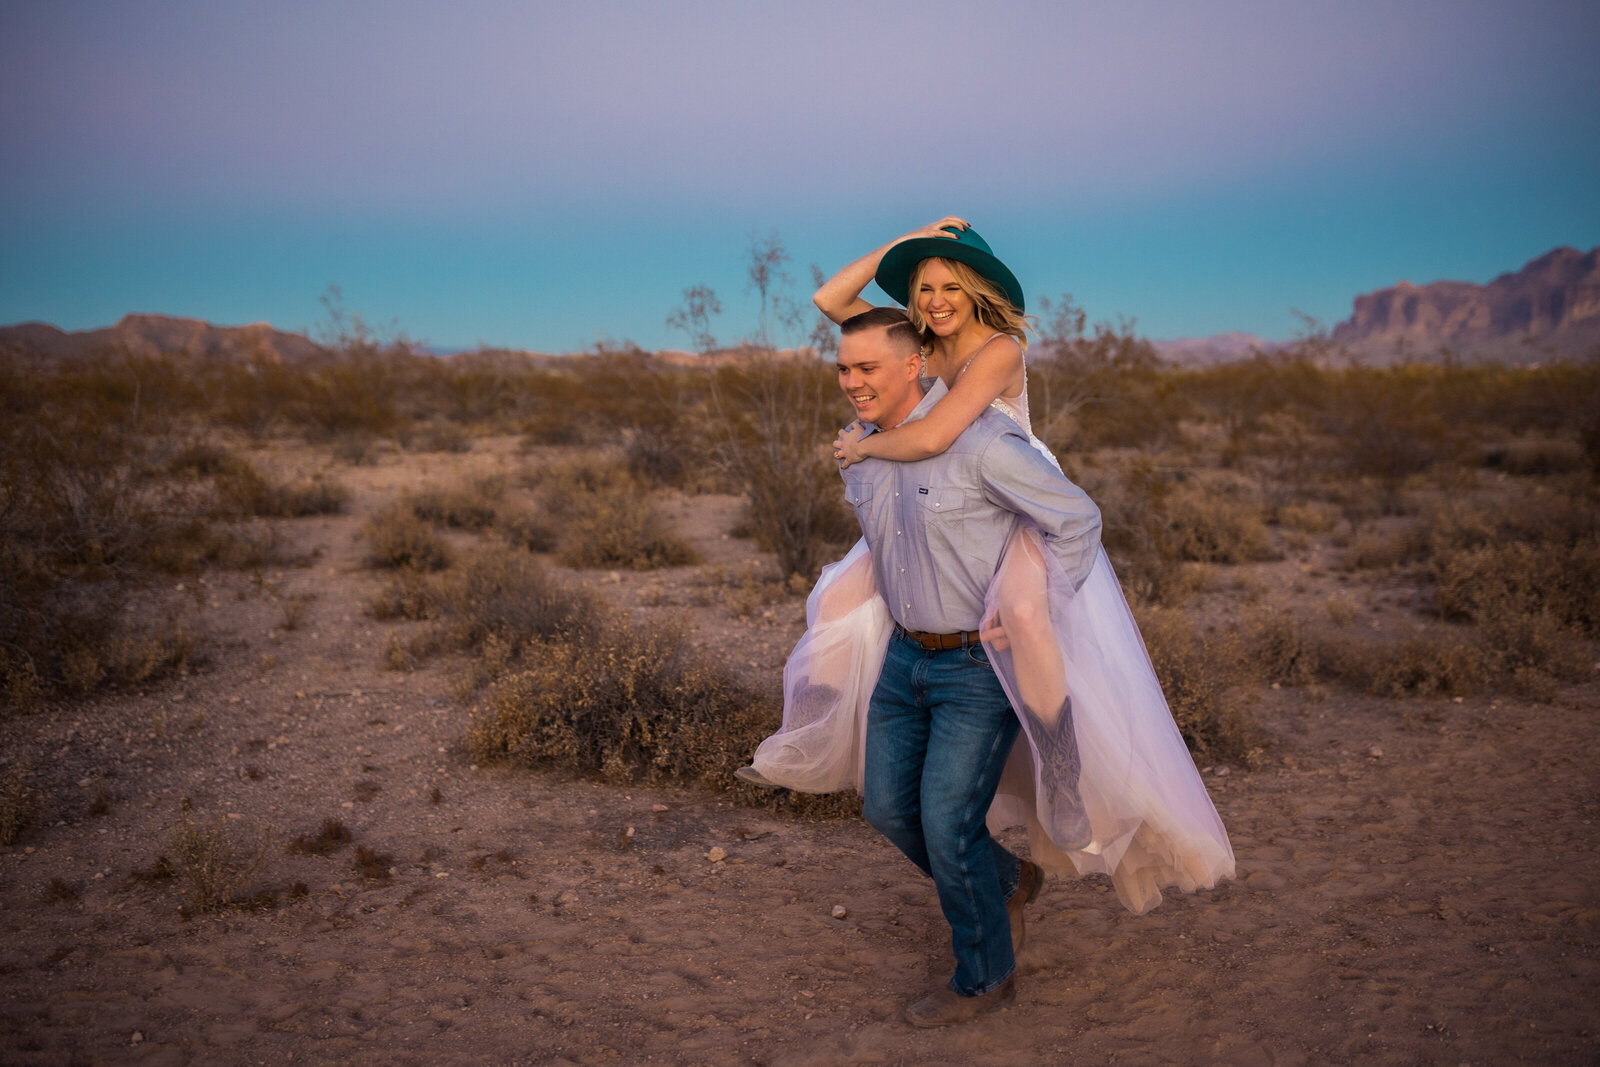 groom giving the bride a piggyback ride in the desert